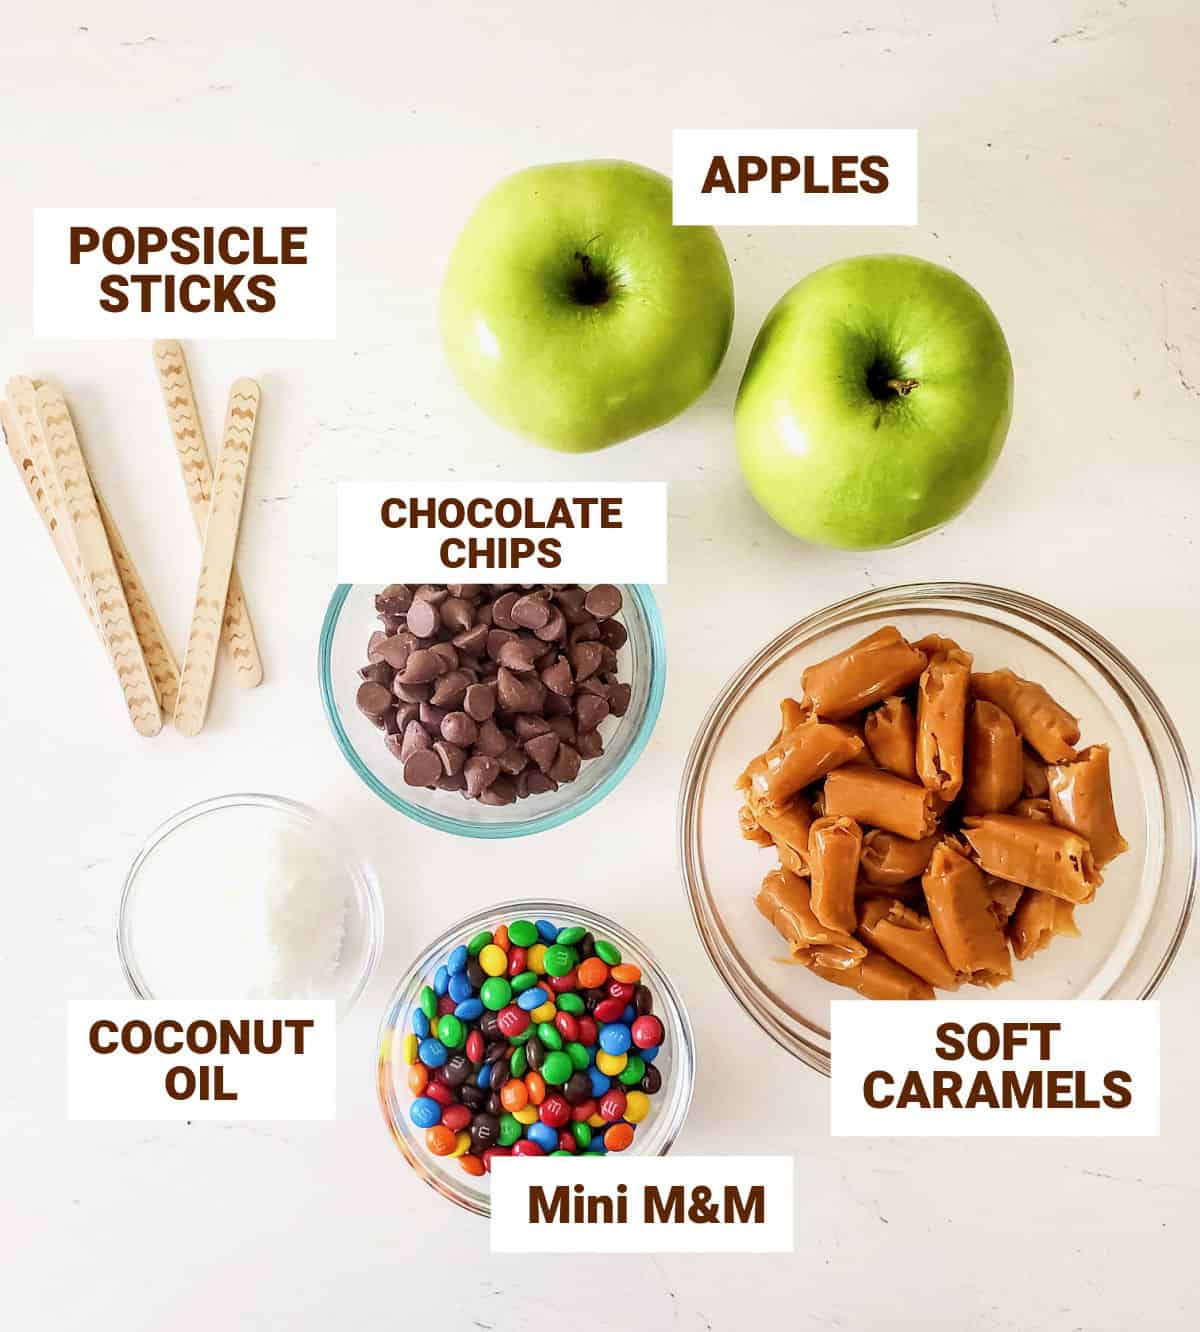 White surface with ingredients for candy apple slices including caramels, chocolate, popsicle sticks, coconut oil.